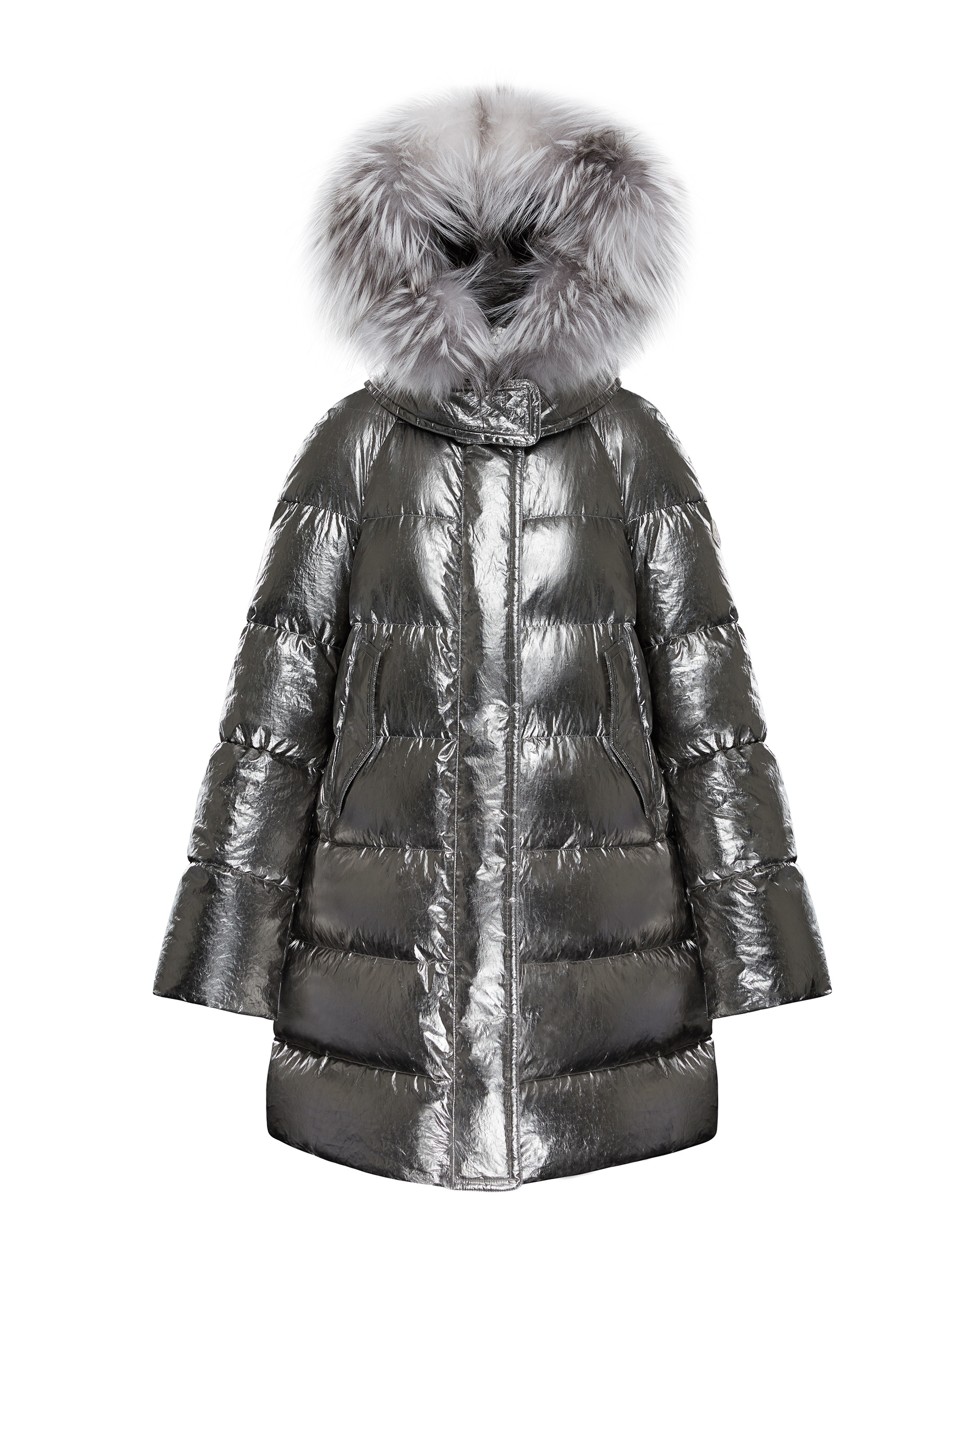 Moncler. The silver down parka, inspired by the moon landing in the 1970s and featuring a fluffy collar, is elegant and warm. Price on request.